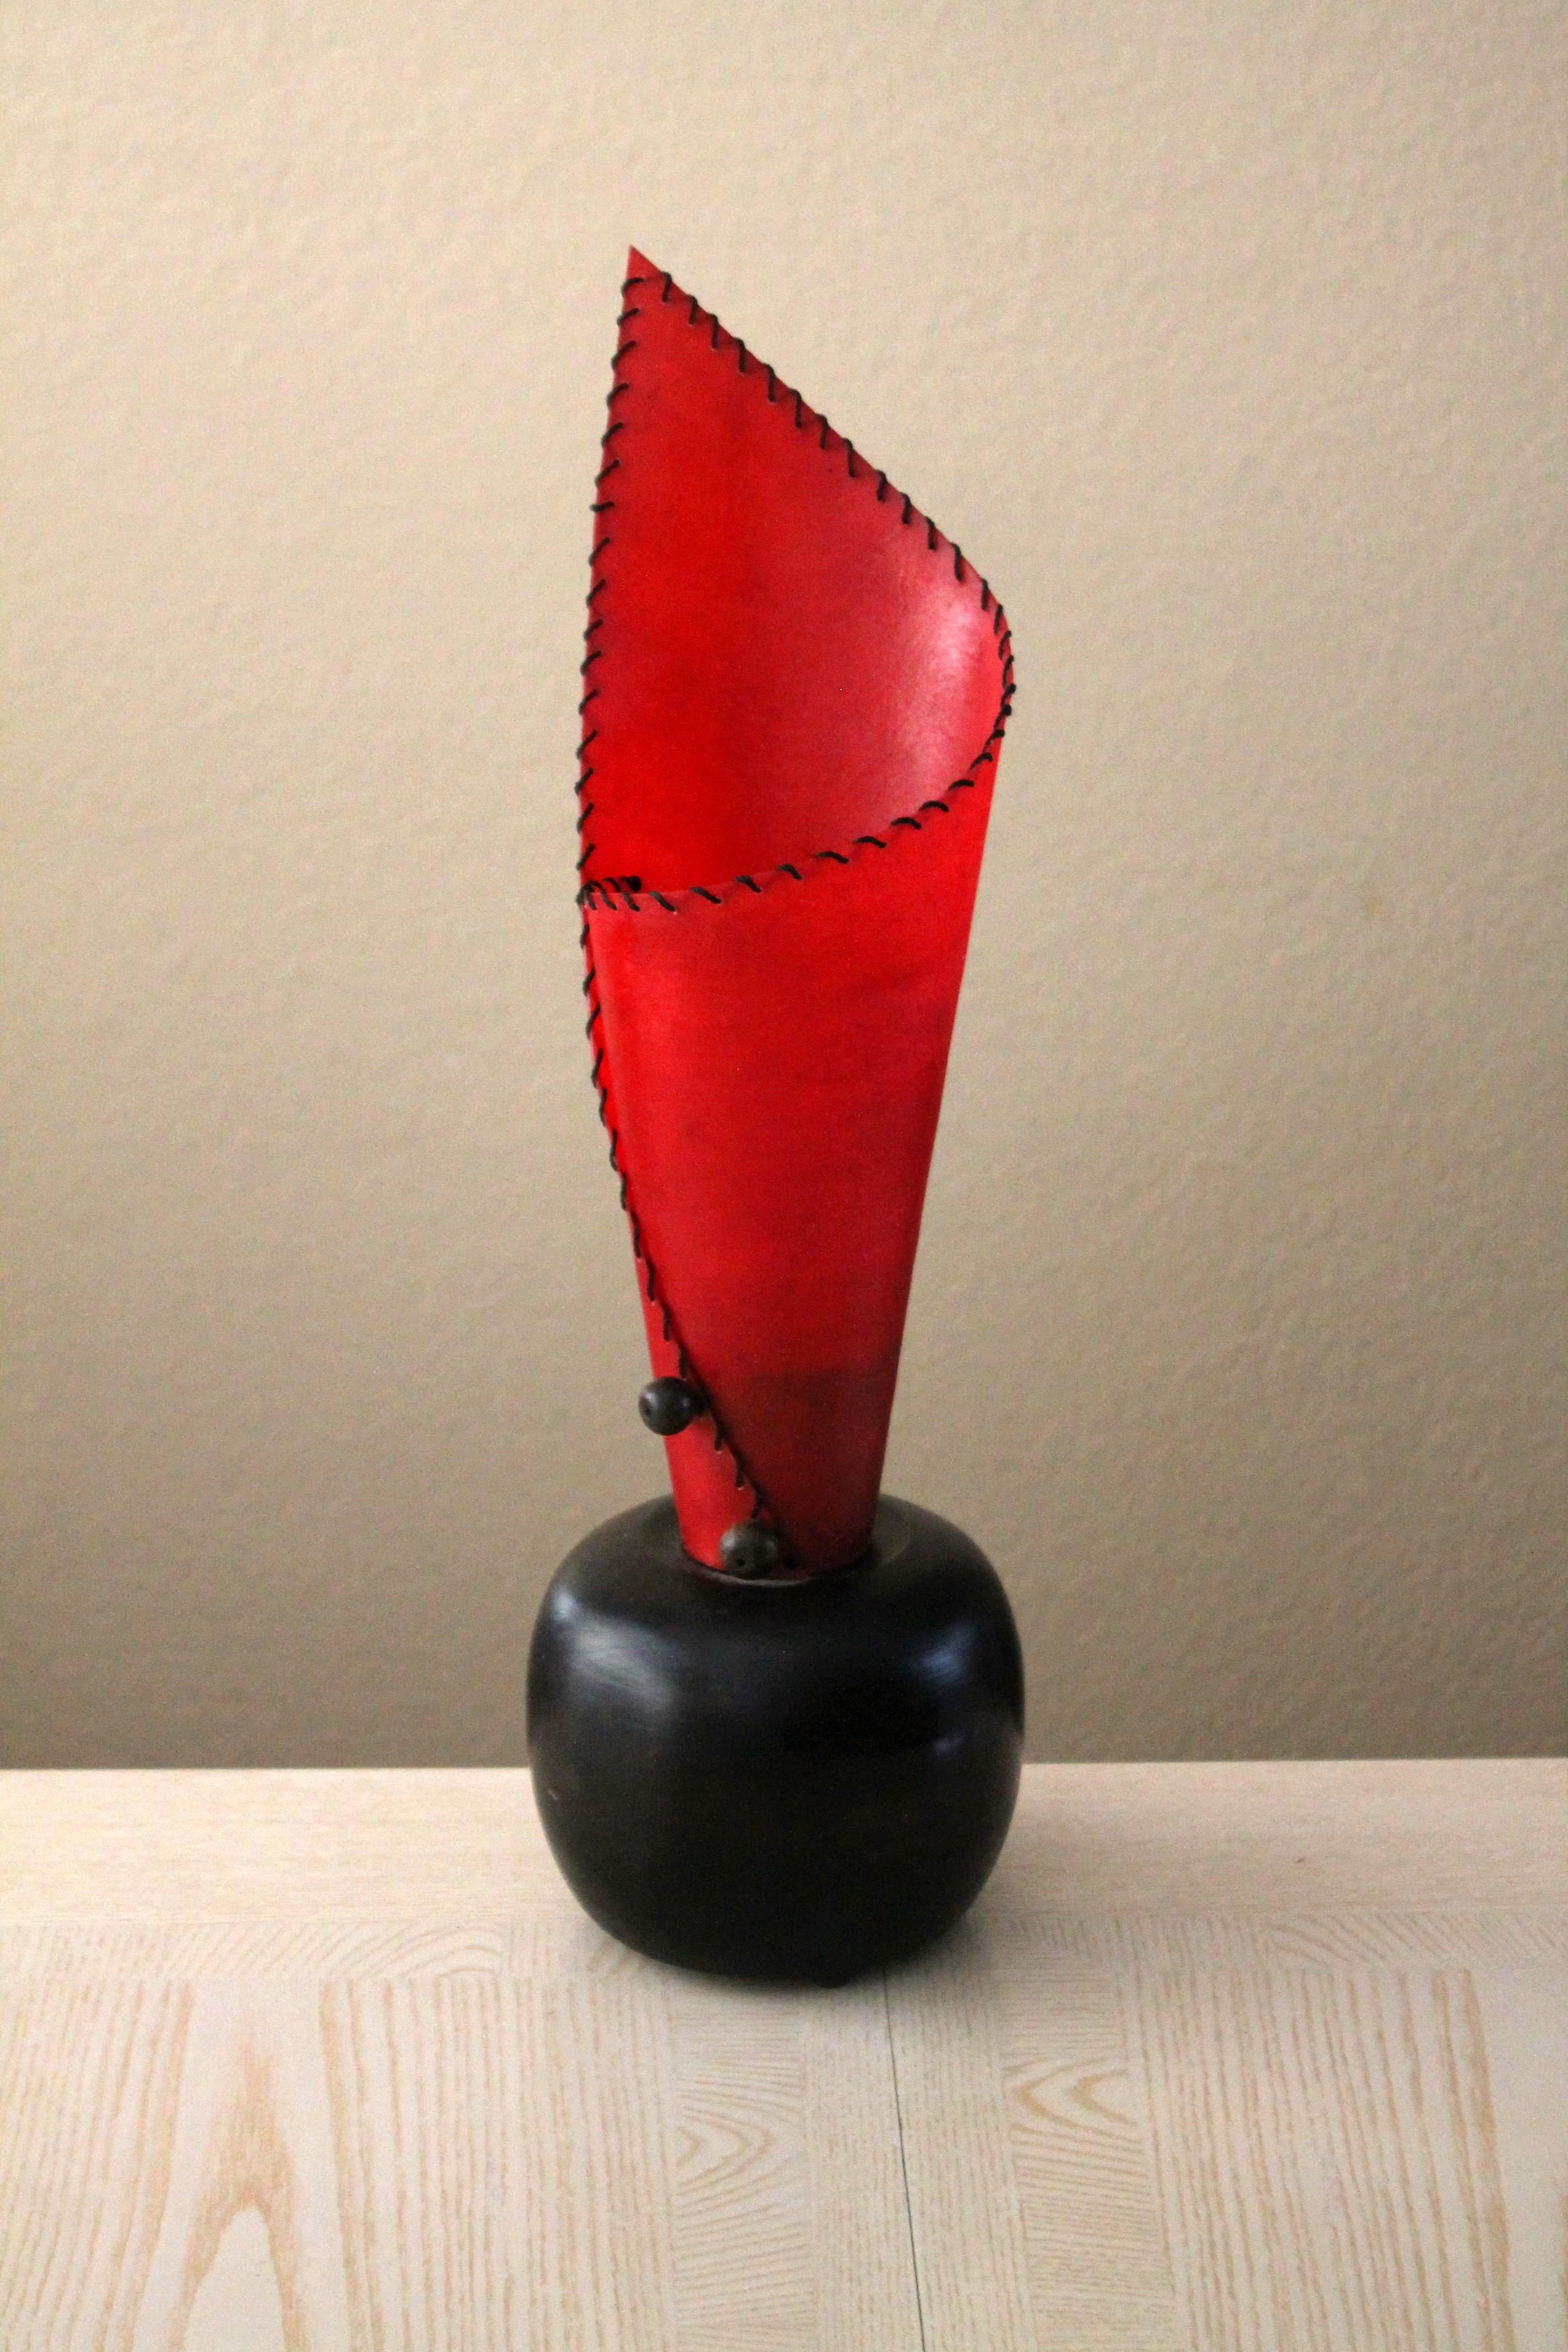 Marvelous!

Fabulous Eighties Post Modern
Conical Fiberglass Table Lamp!

In the manner of Ettore Sottsass


This tall and ultra red fiberglass lamp is a fabulous artifact of the 1980s post-modern movement. It's striking at first glance but it keeps